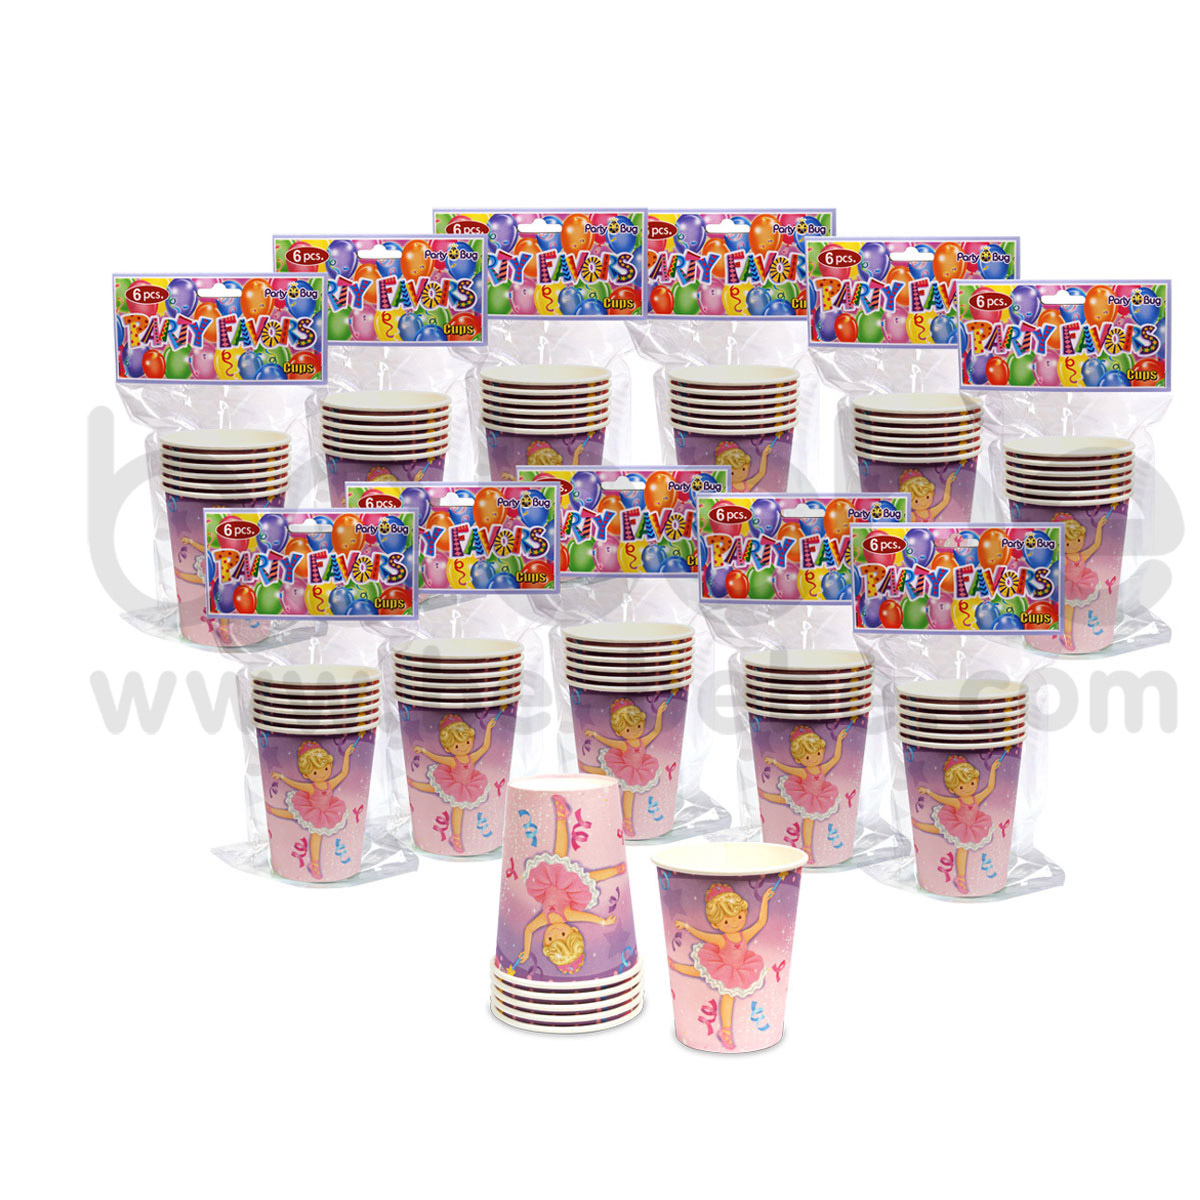 PARTY BUG : Paper cup 9 Oz.,12 Packs